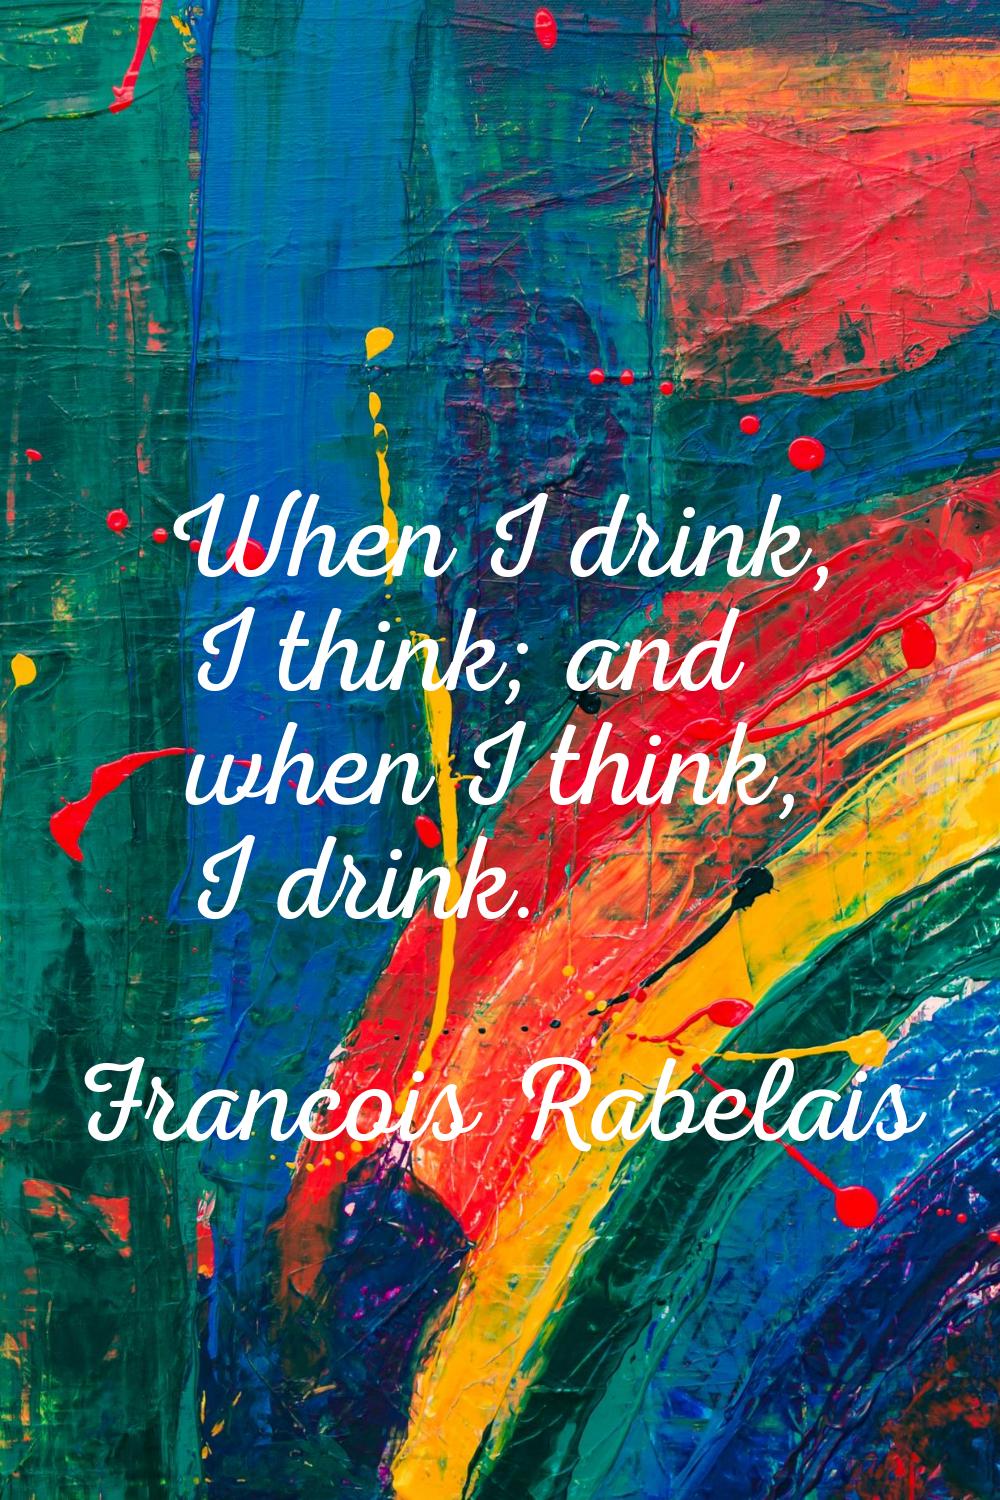 When I drink, I think; and when I think, I drink.